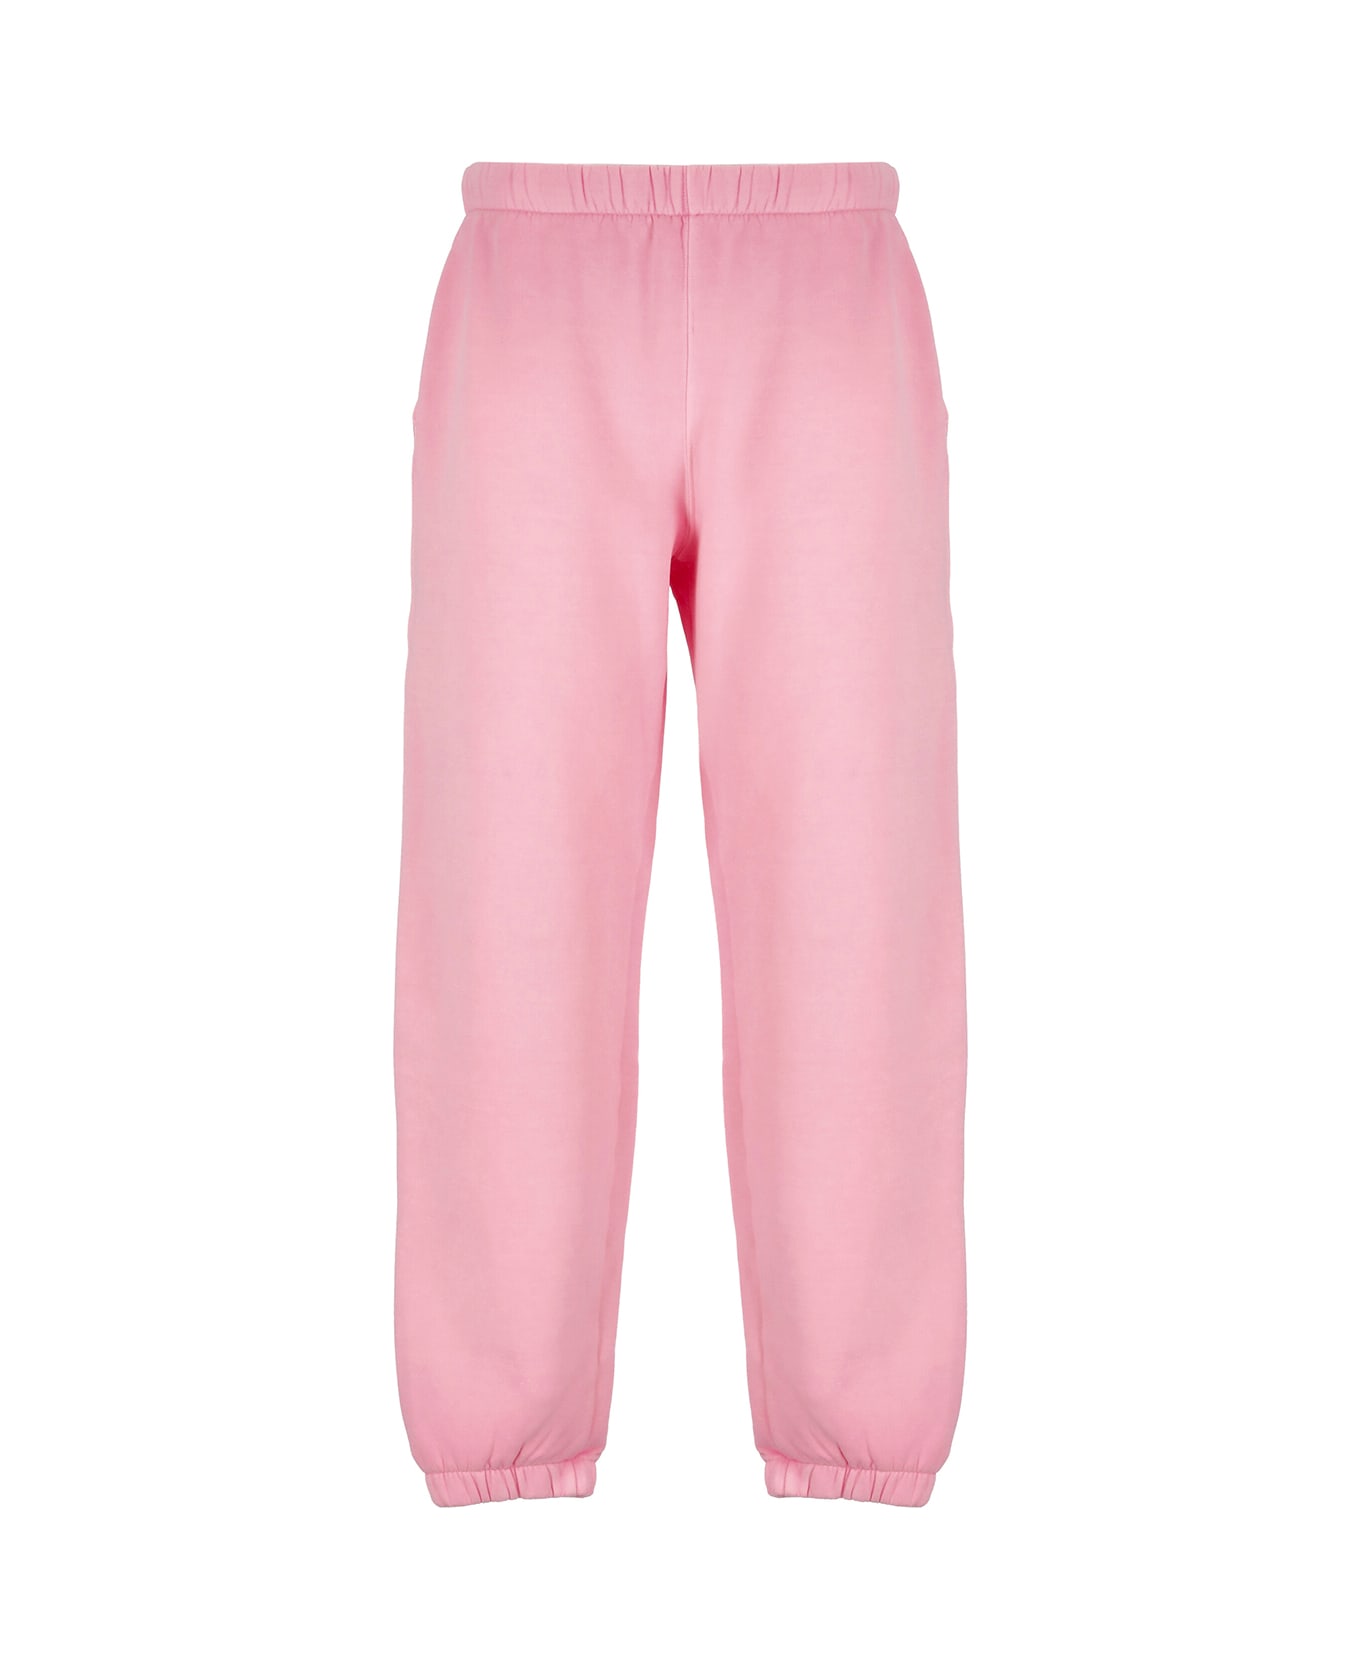 ERL Cotton Pants - Pink